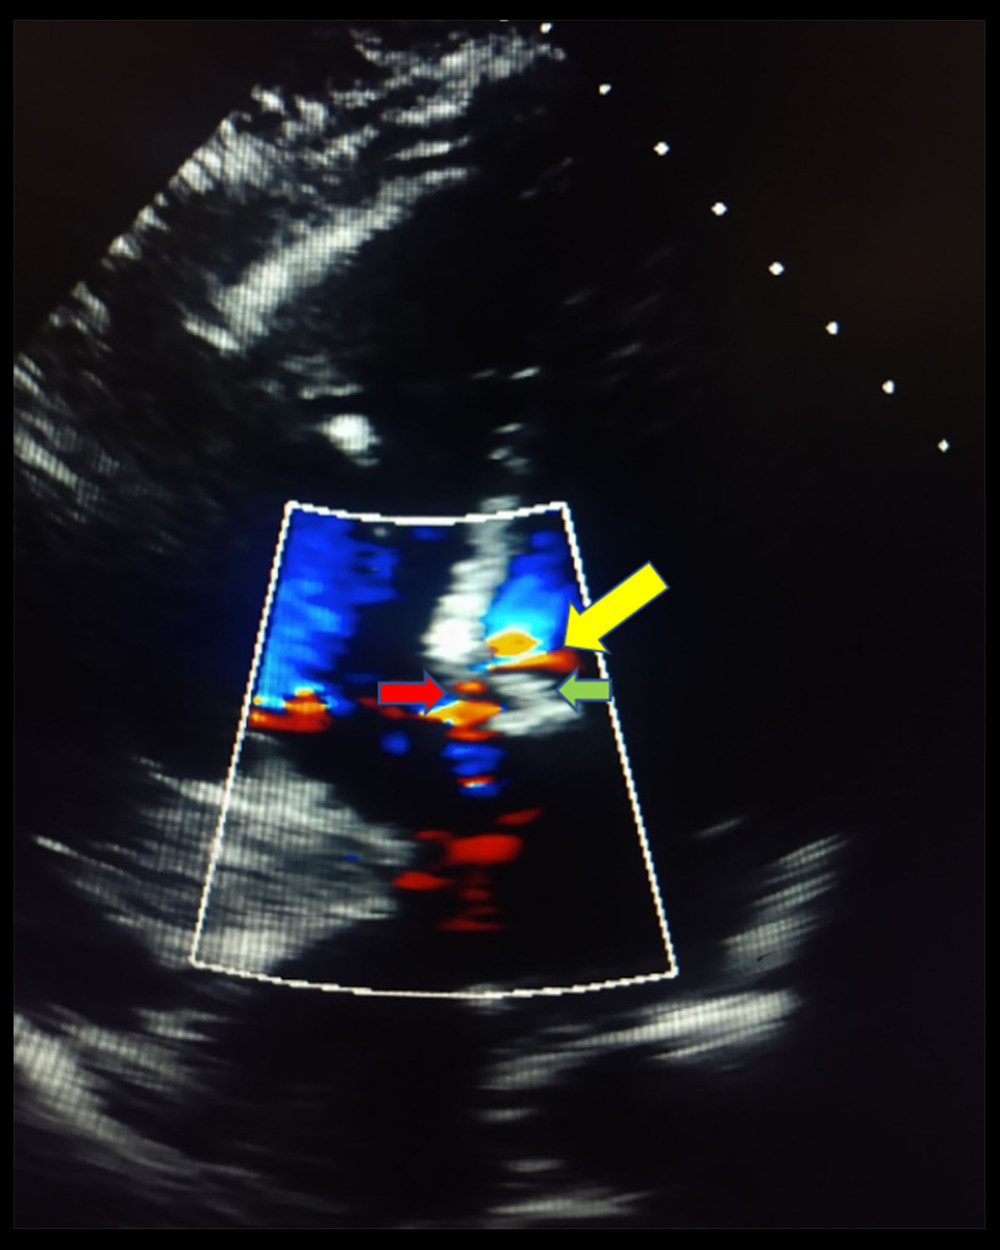 Apical 4-chamber view demonstrating chordal systolic anterior motion (SAM) with an intracavitary gradient at the level of the chordae with turbulent flow through the outflow tract. The yellow arrow indicates the intracavitary flow acceleration through the left ventricle outflow tract (LVOT) due to chordal SAM. The green arrow indicates the anterior mitral leaflets. The red arrow demonstrates the turbulent flow in the LVOT due to chordal SAM before reaching the pulmonic valve.